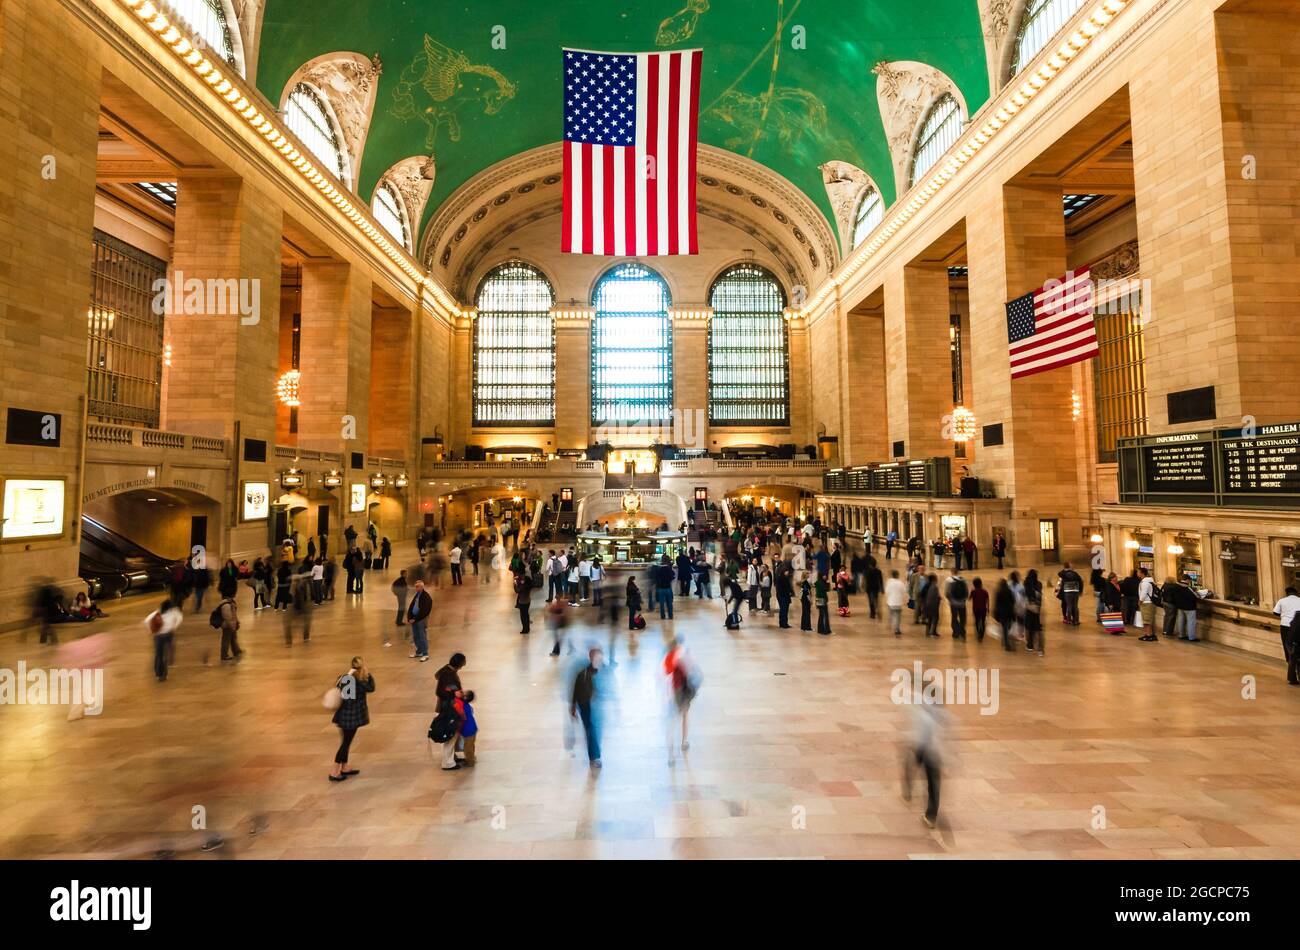 Main Concourse of Grand Central Station (Grand Central Terminus), New York City, NY, USA. Stock Photo